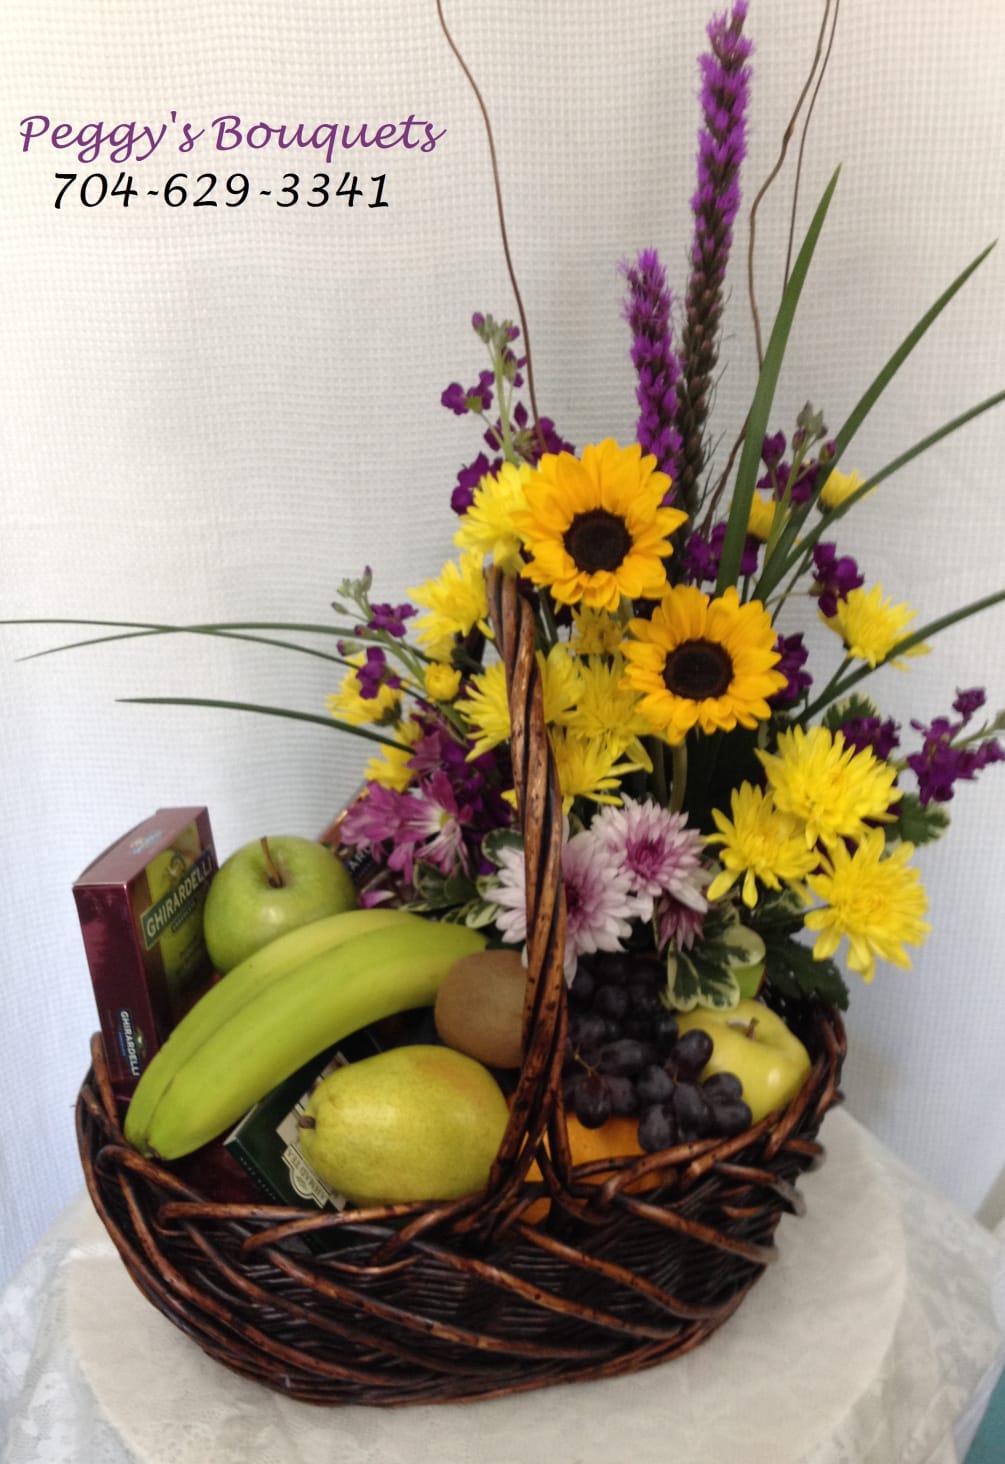 Basket of delicious fruits, including but not limited to, apples, bananas, grapes